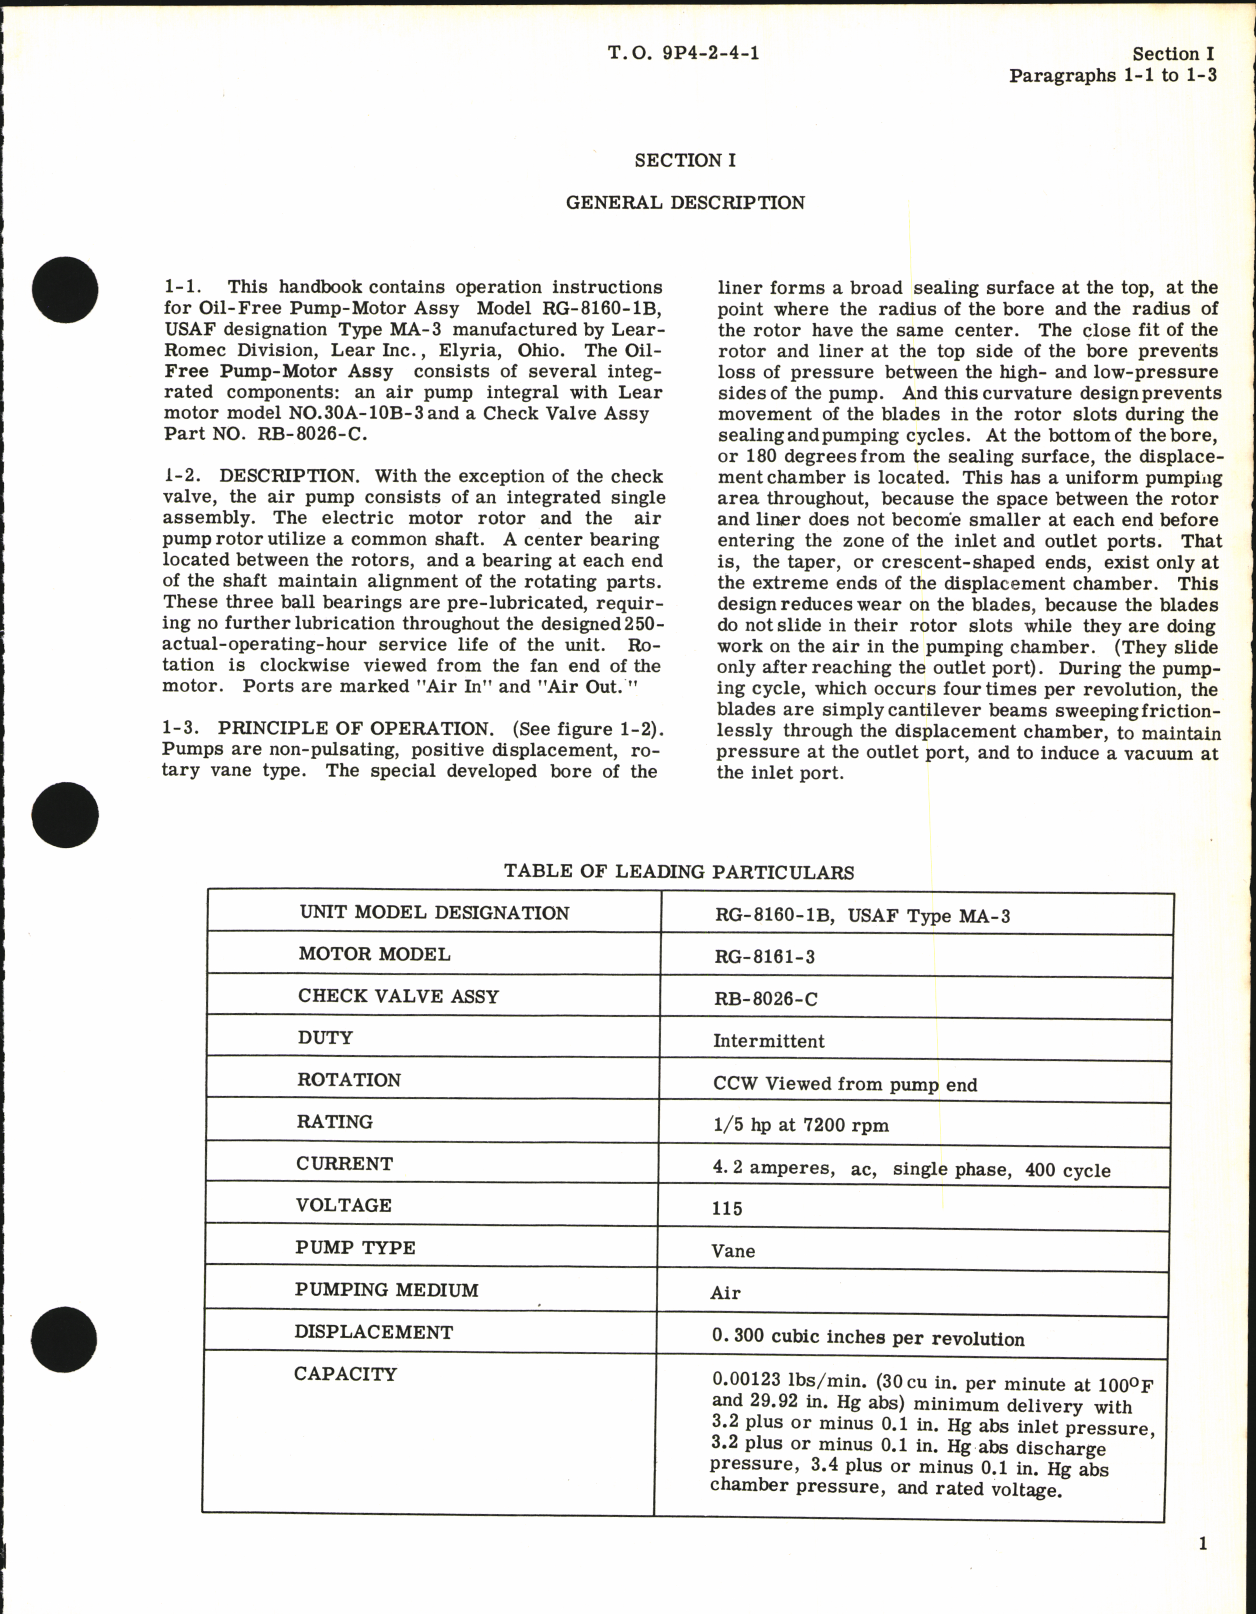 Sample page 5 from AirCorps Library document: Handbook of Operating Instructions for Oil-Free Air Pressure Pump Model RG-8160-1B